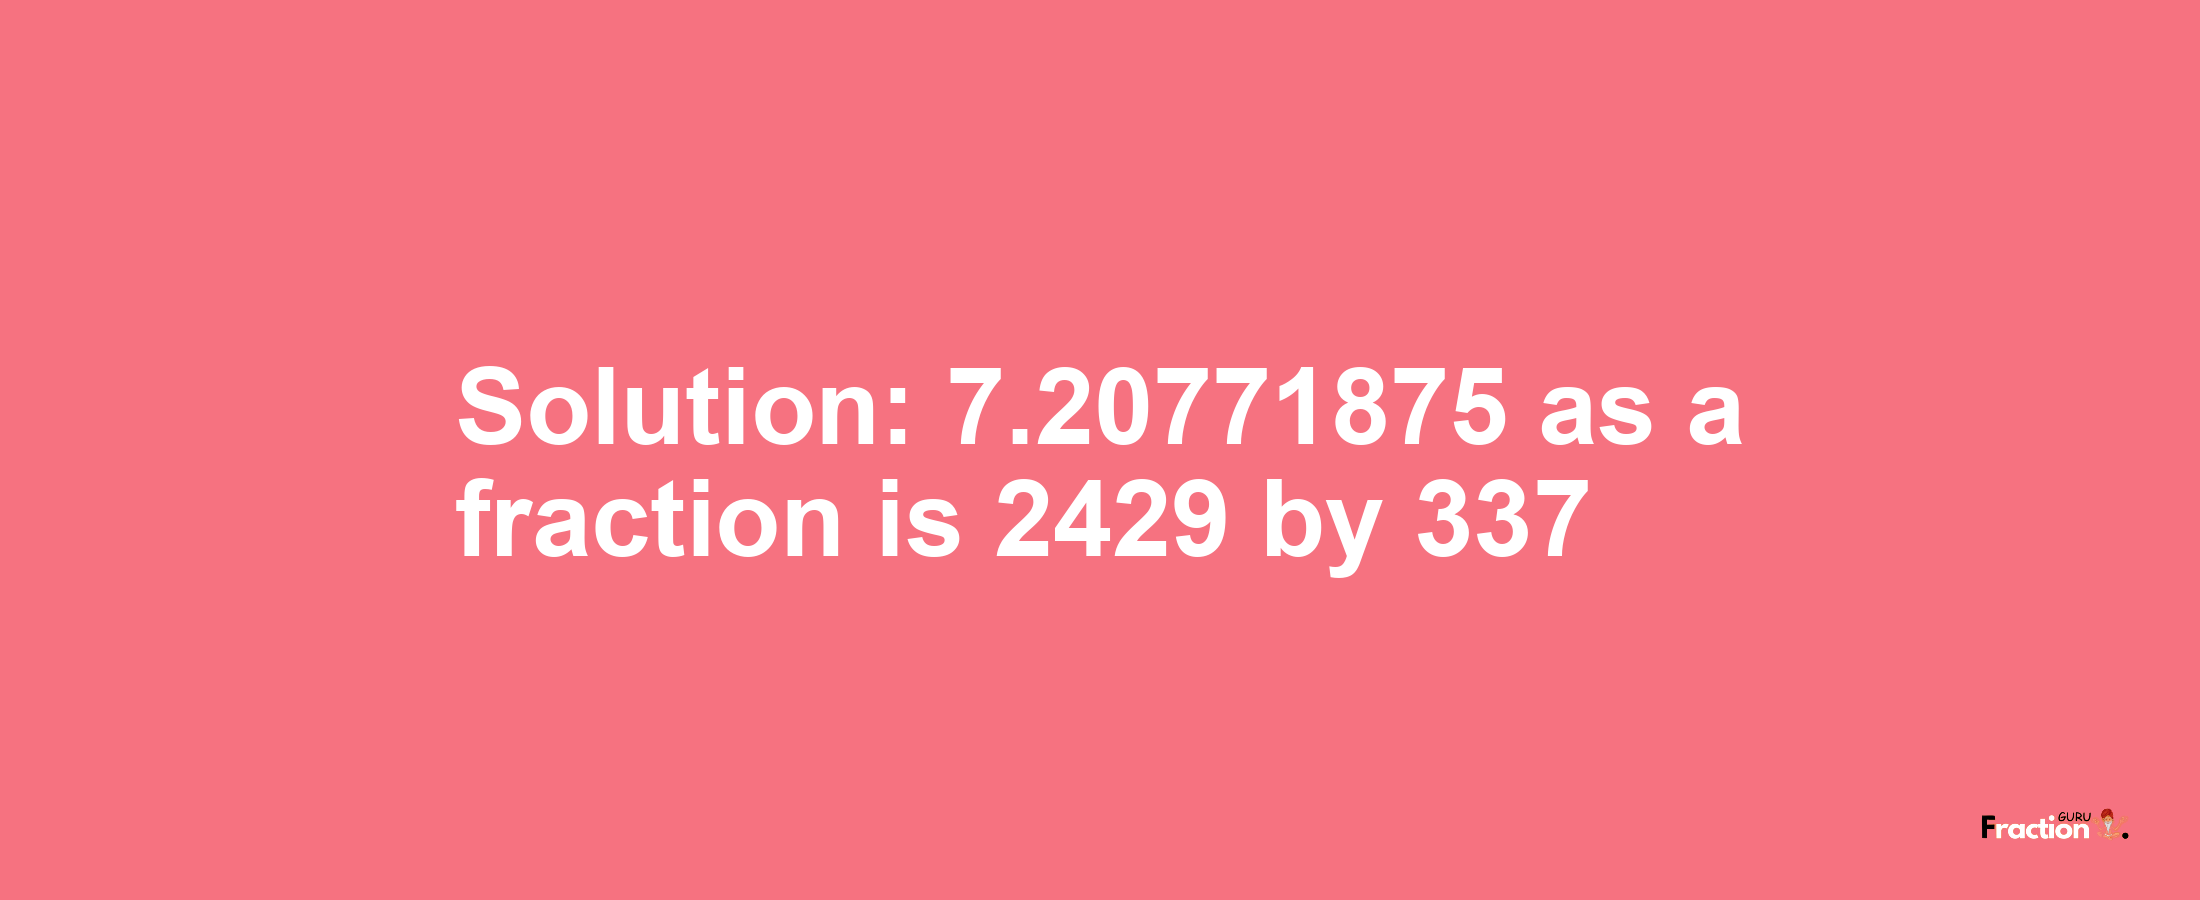 Solution:7.20771875 as a fraction is 2429/337